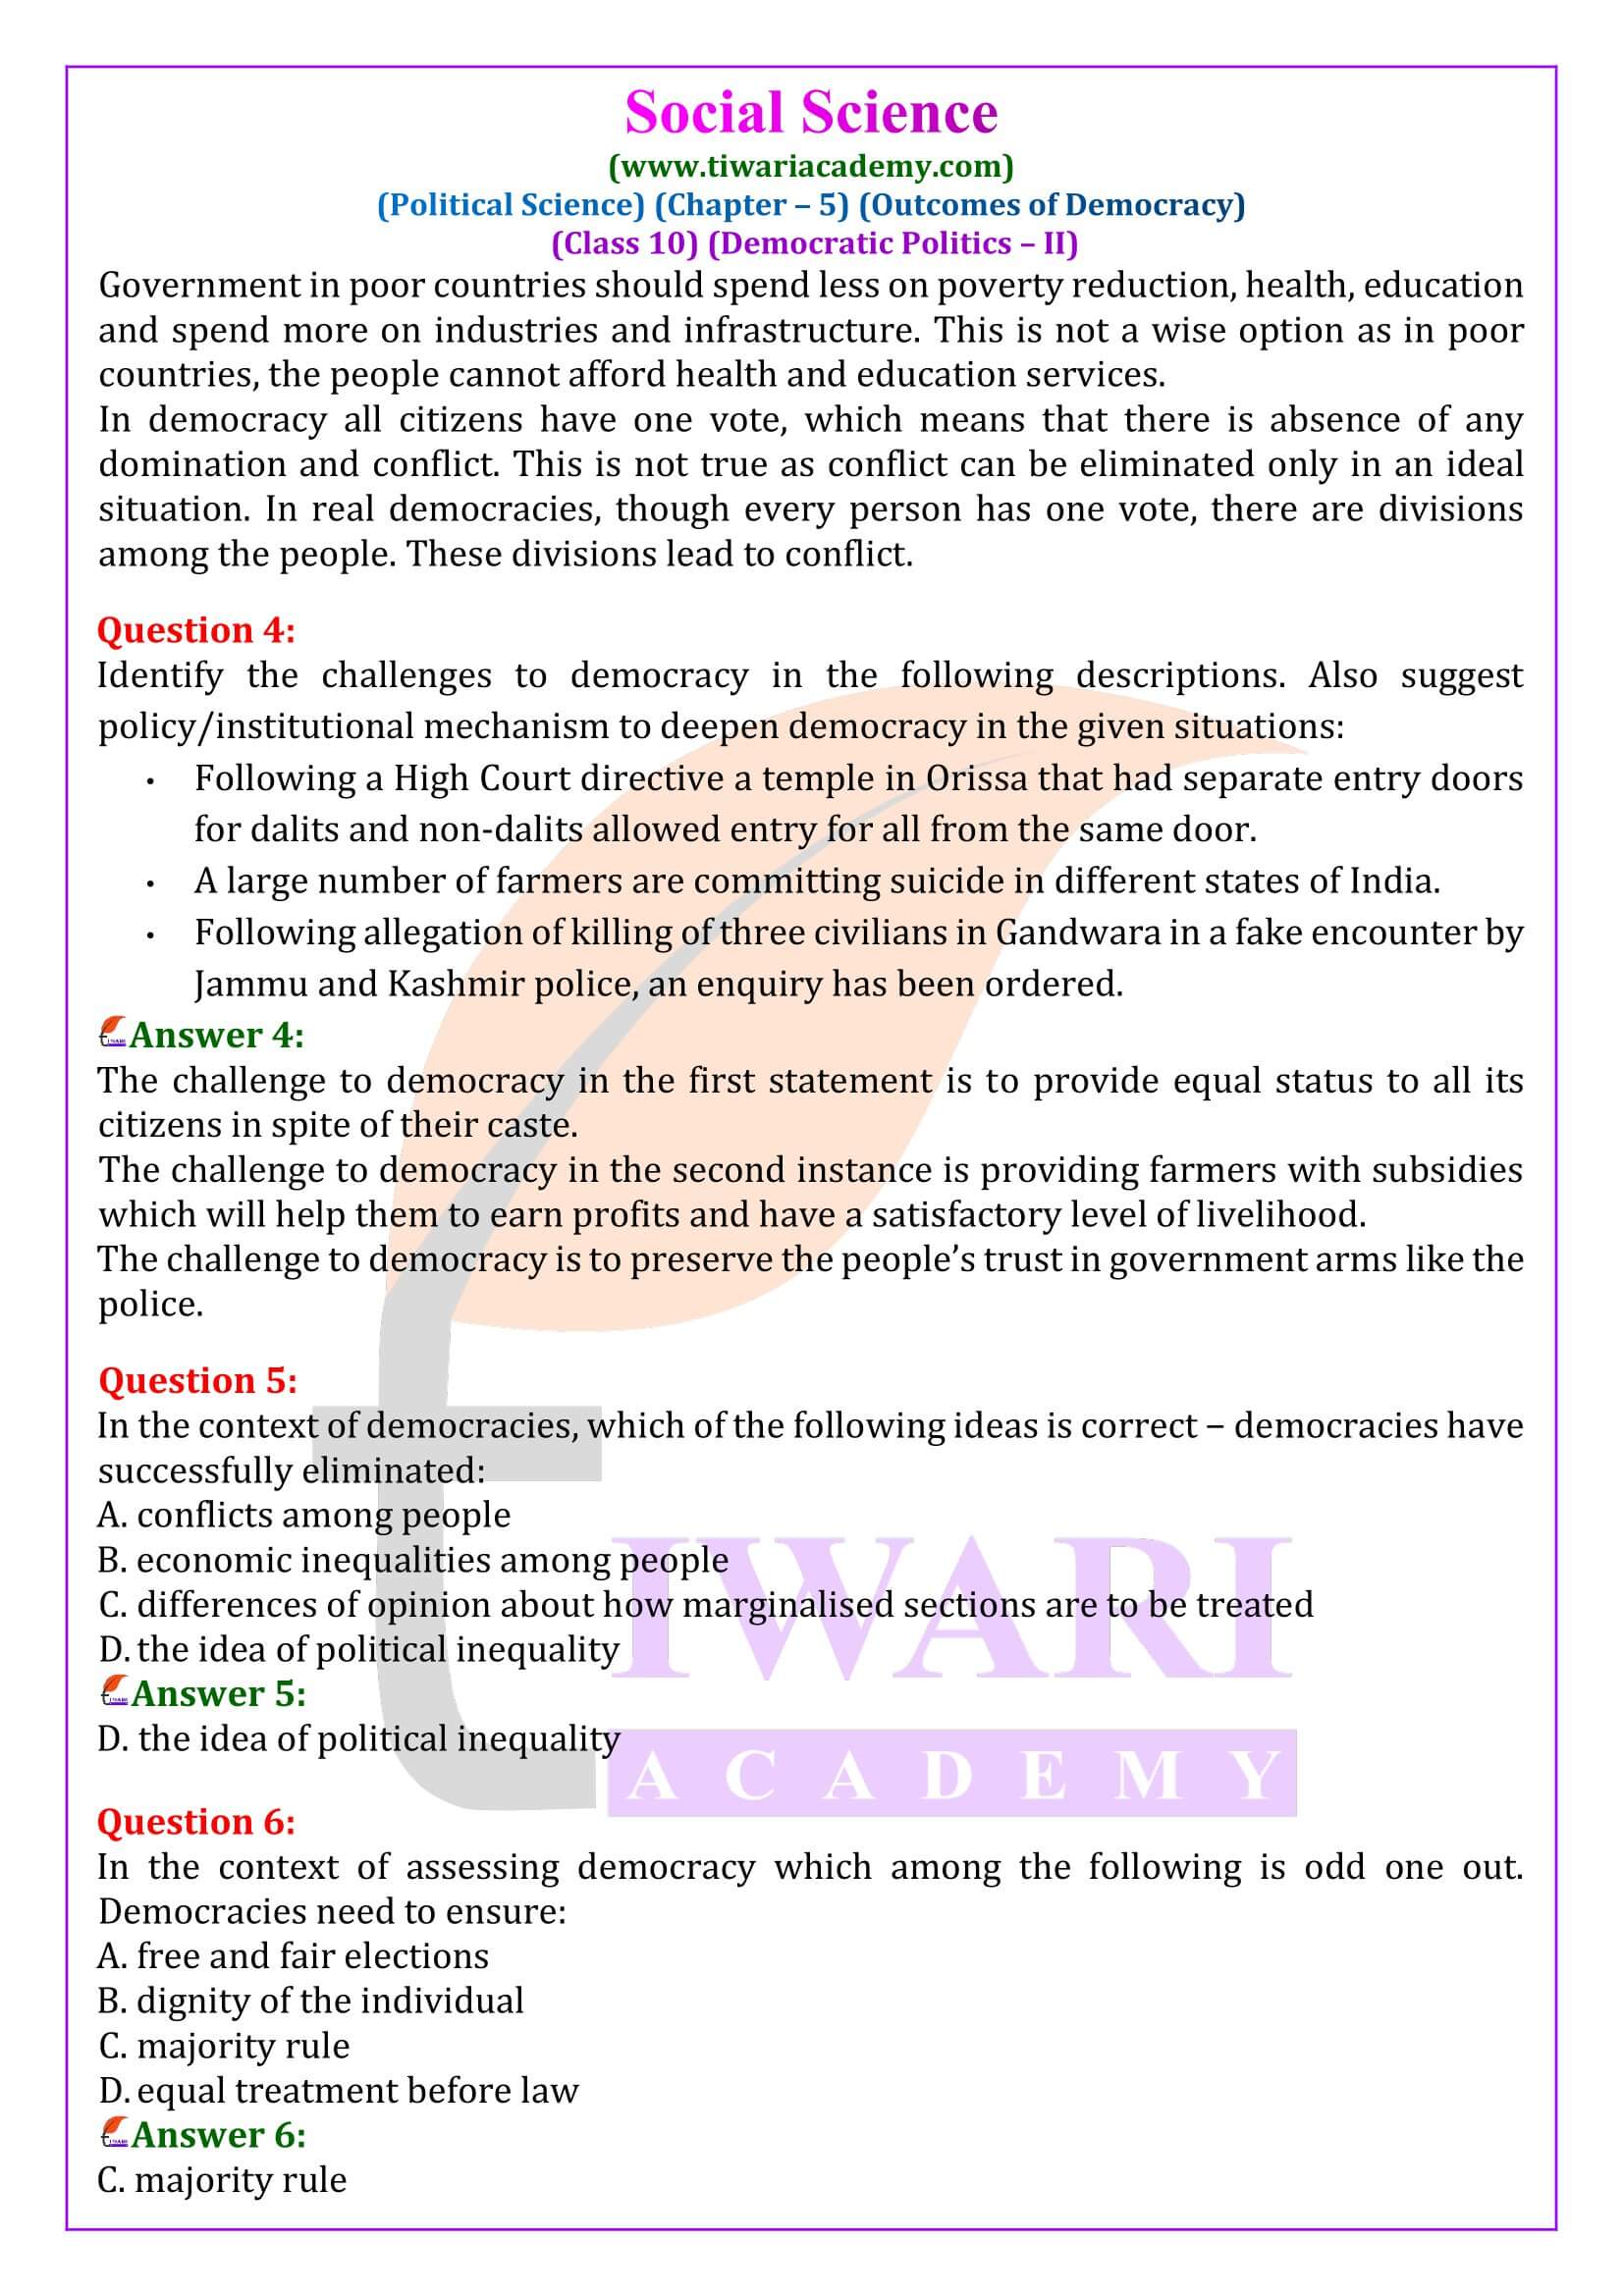 Class 10 Civics Chapter 5 Outcomes of Democracy